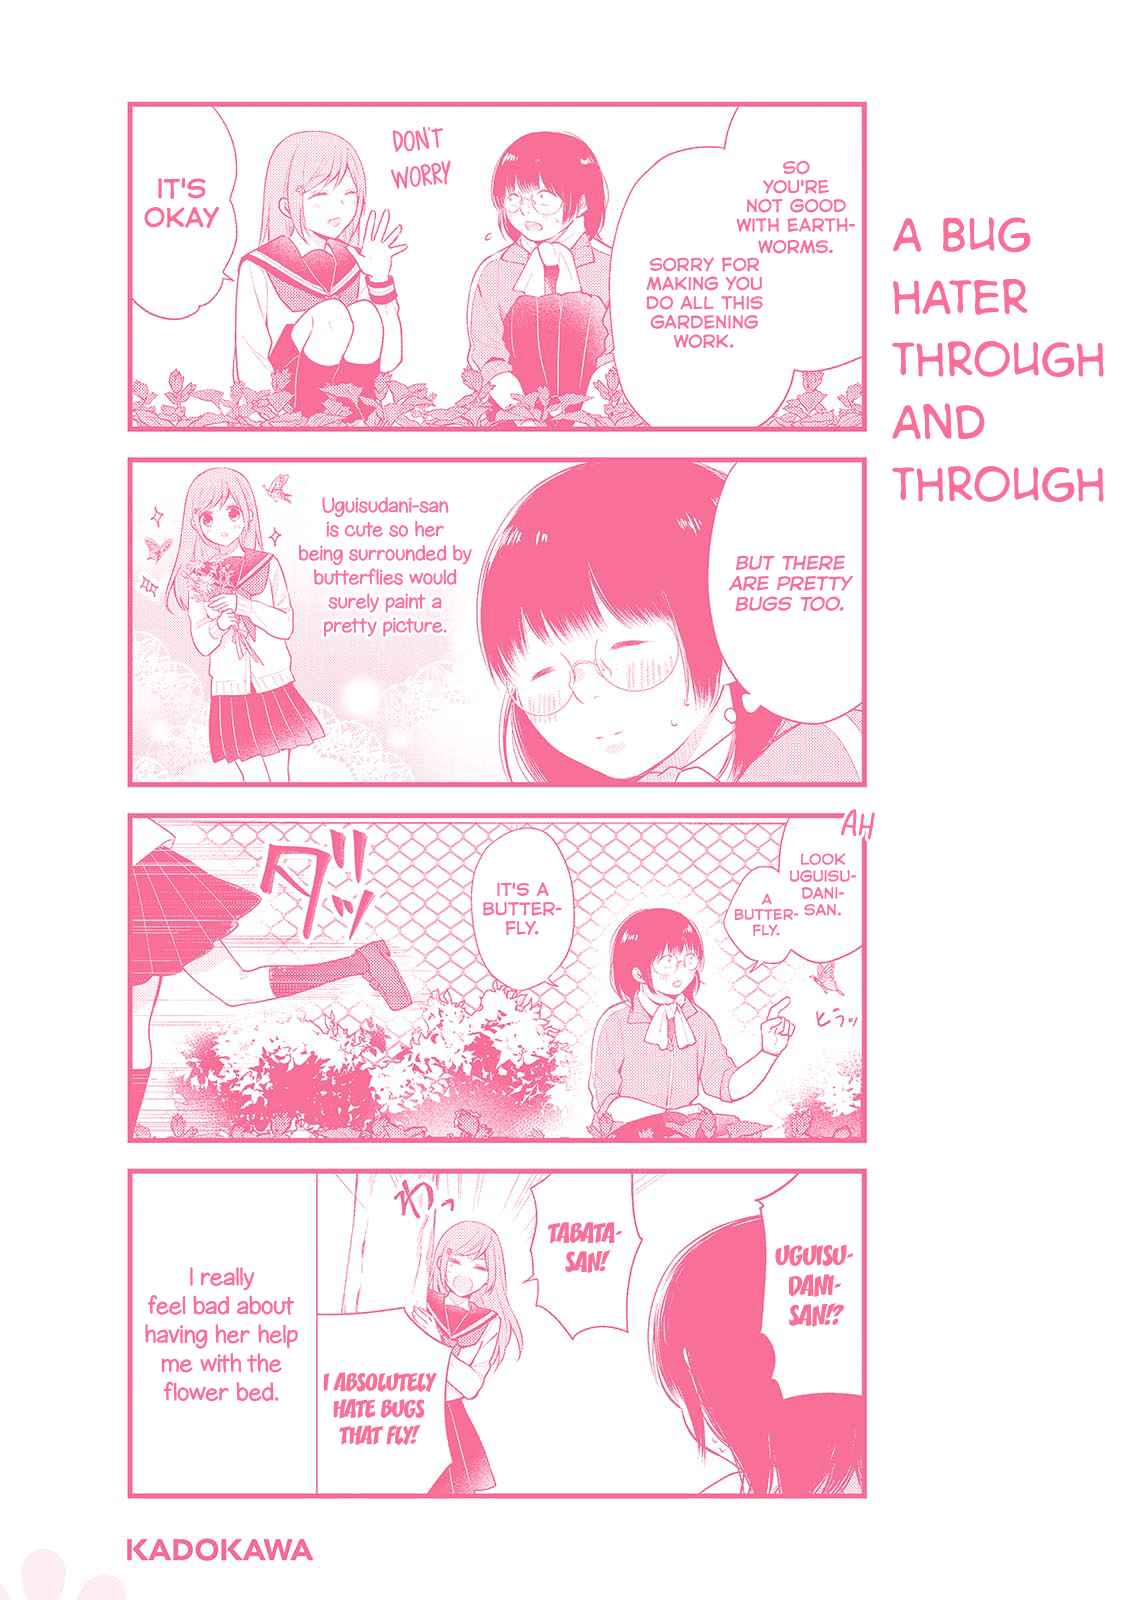 A Bouquet for an Ugly Girl Vol. 2 Ch. 12.5 Volume 2 Extras